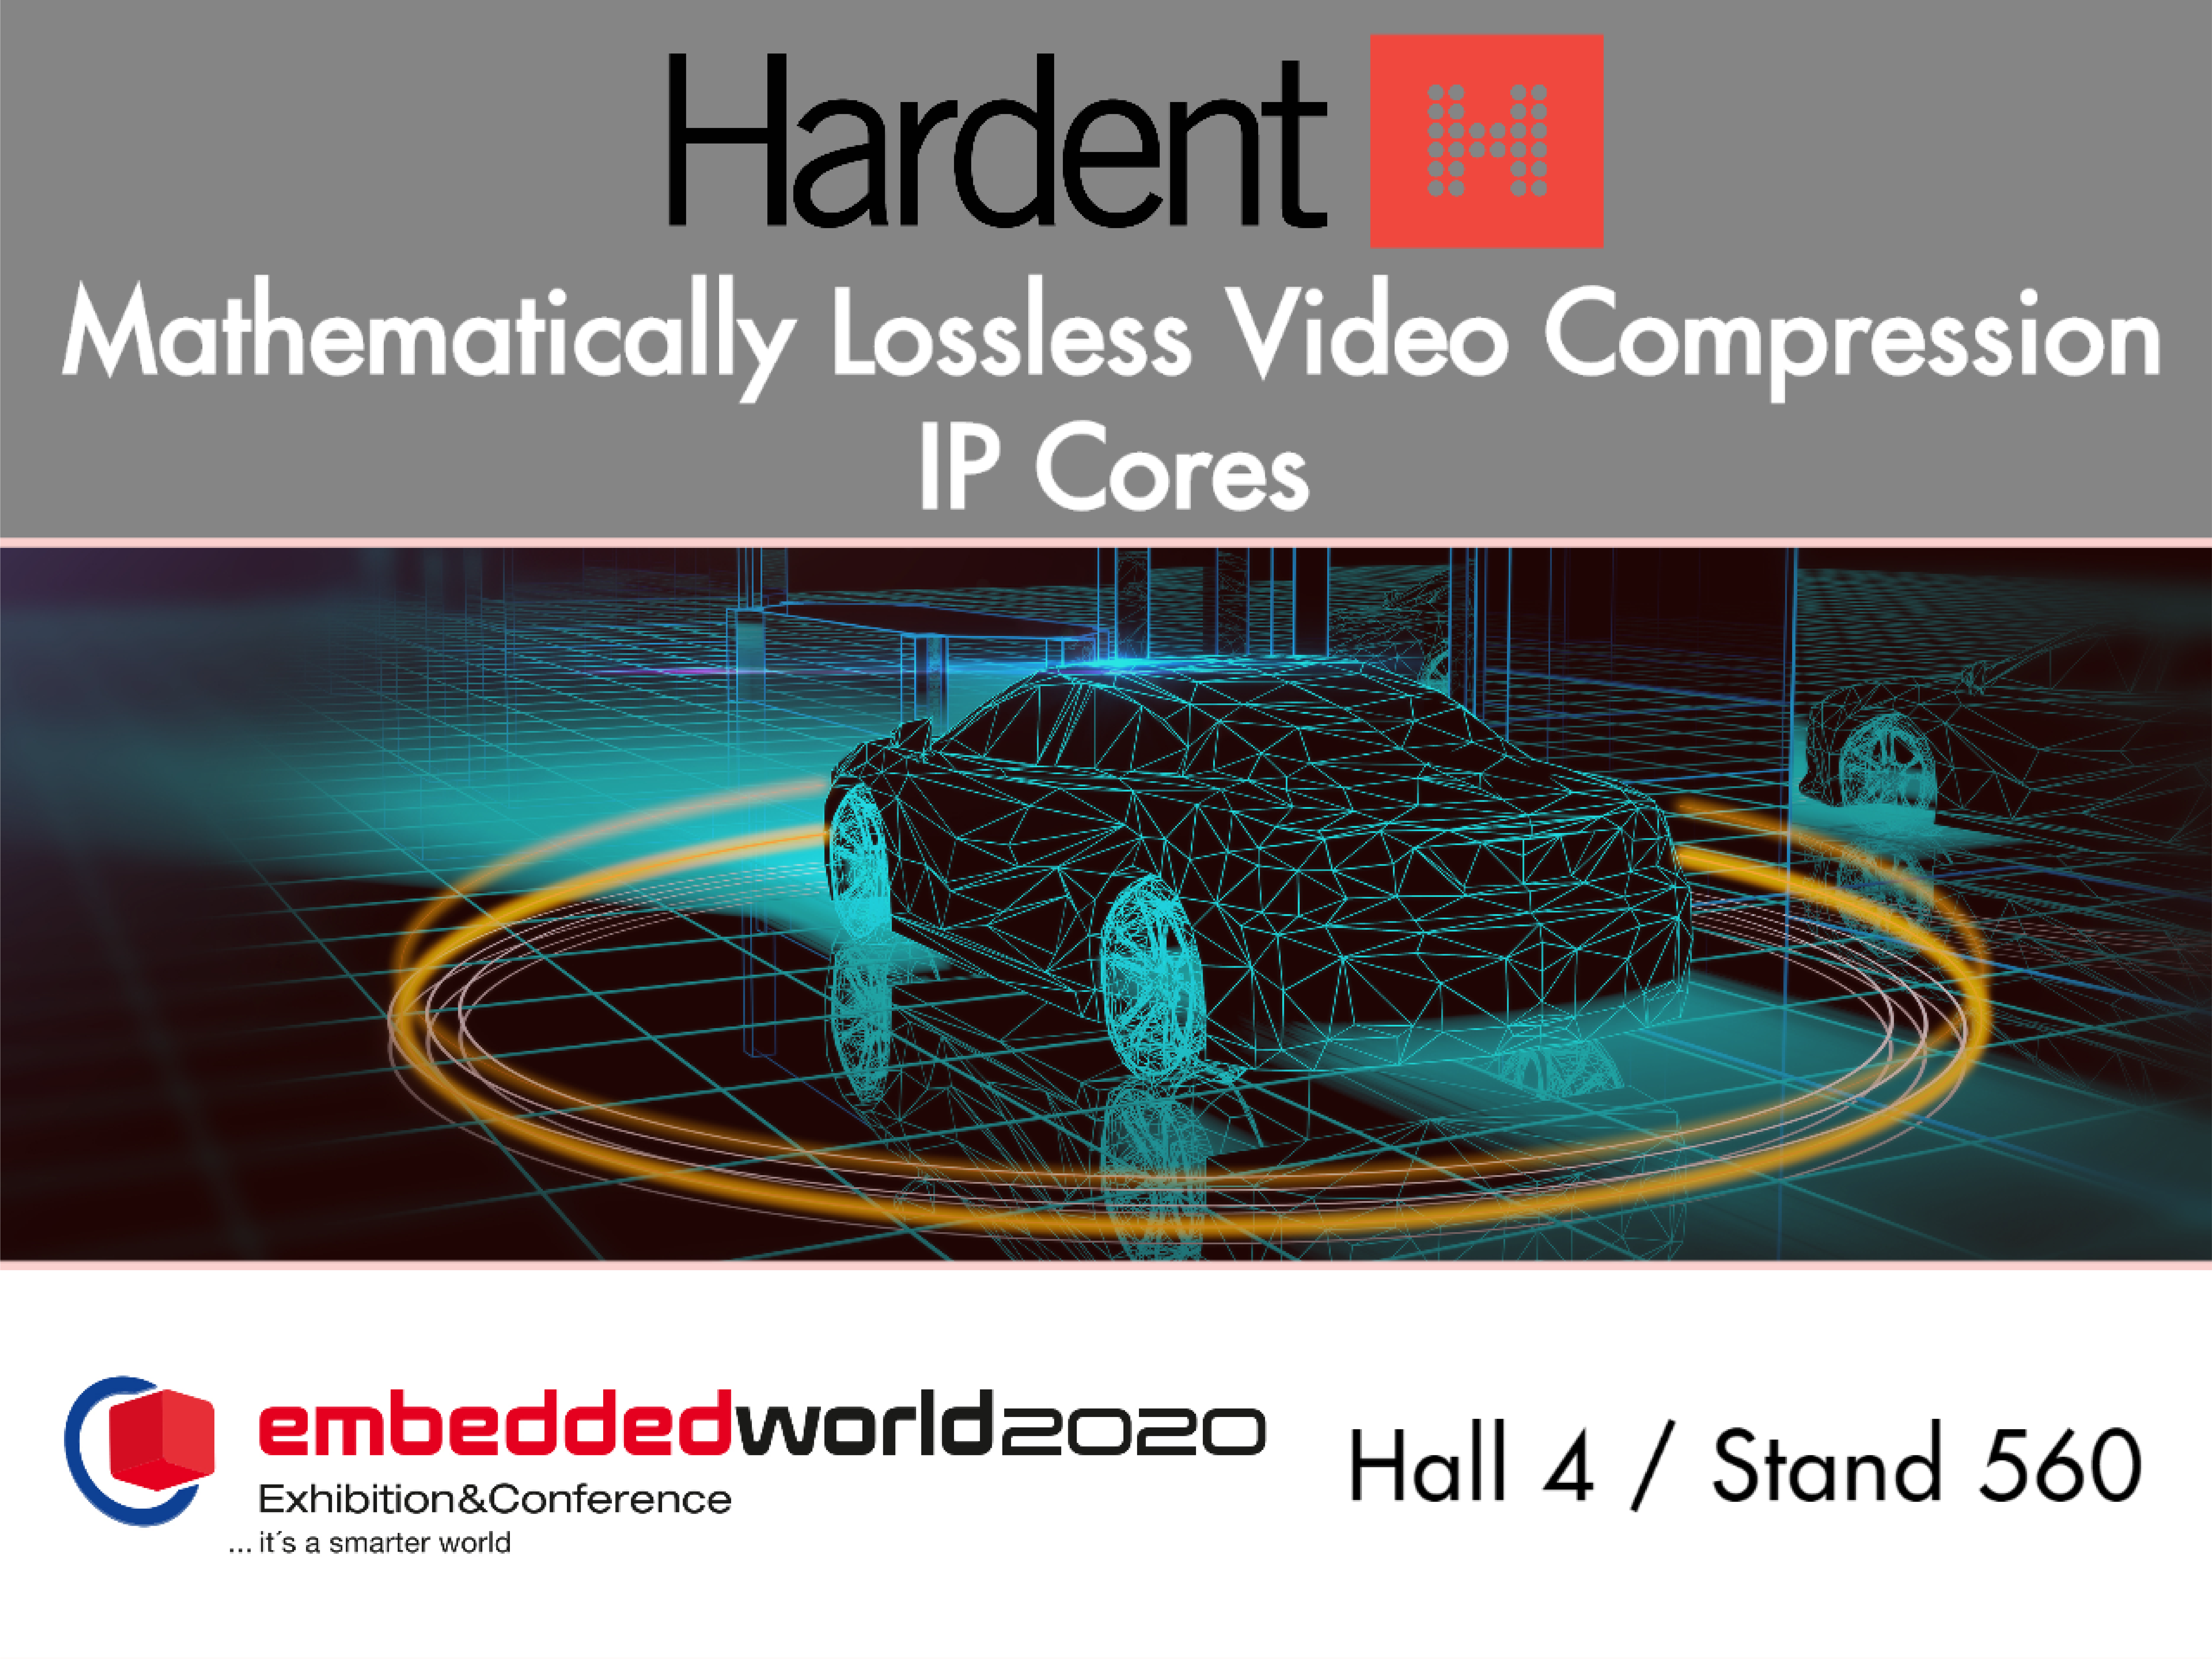 New mathematically lossless compression IP cores for automotive image sensors